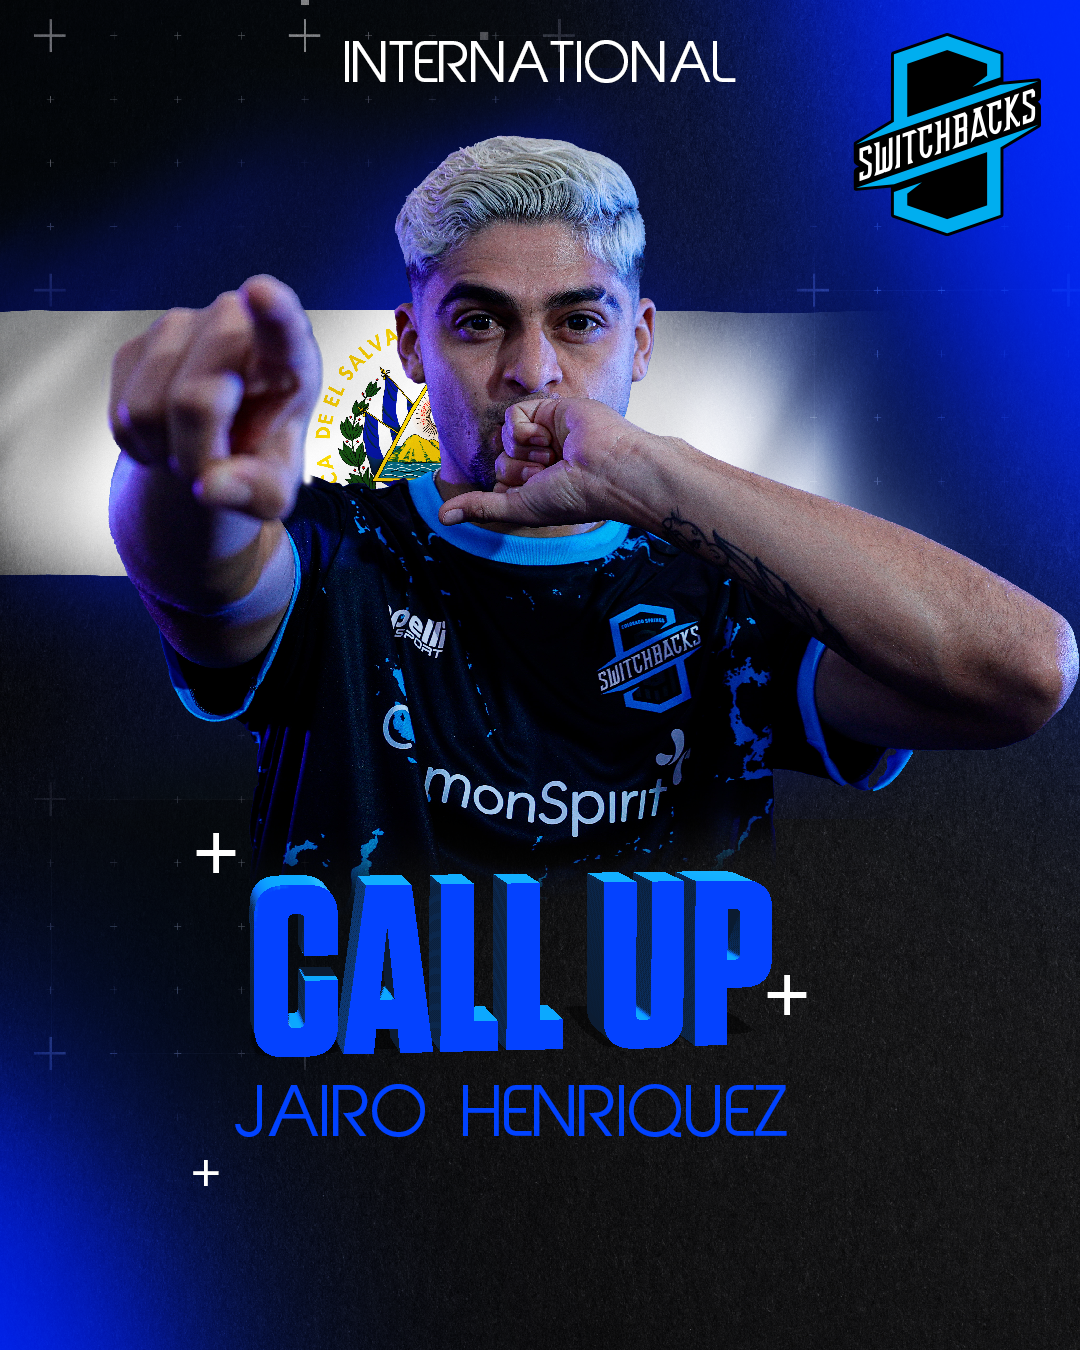 Switchbacks FC Player Jairo Henriquez Called Up For International Play featured image